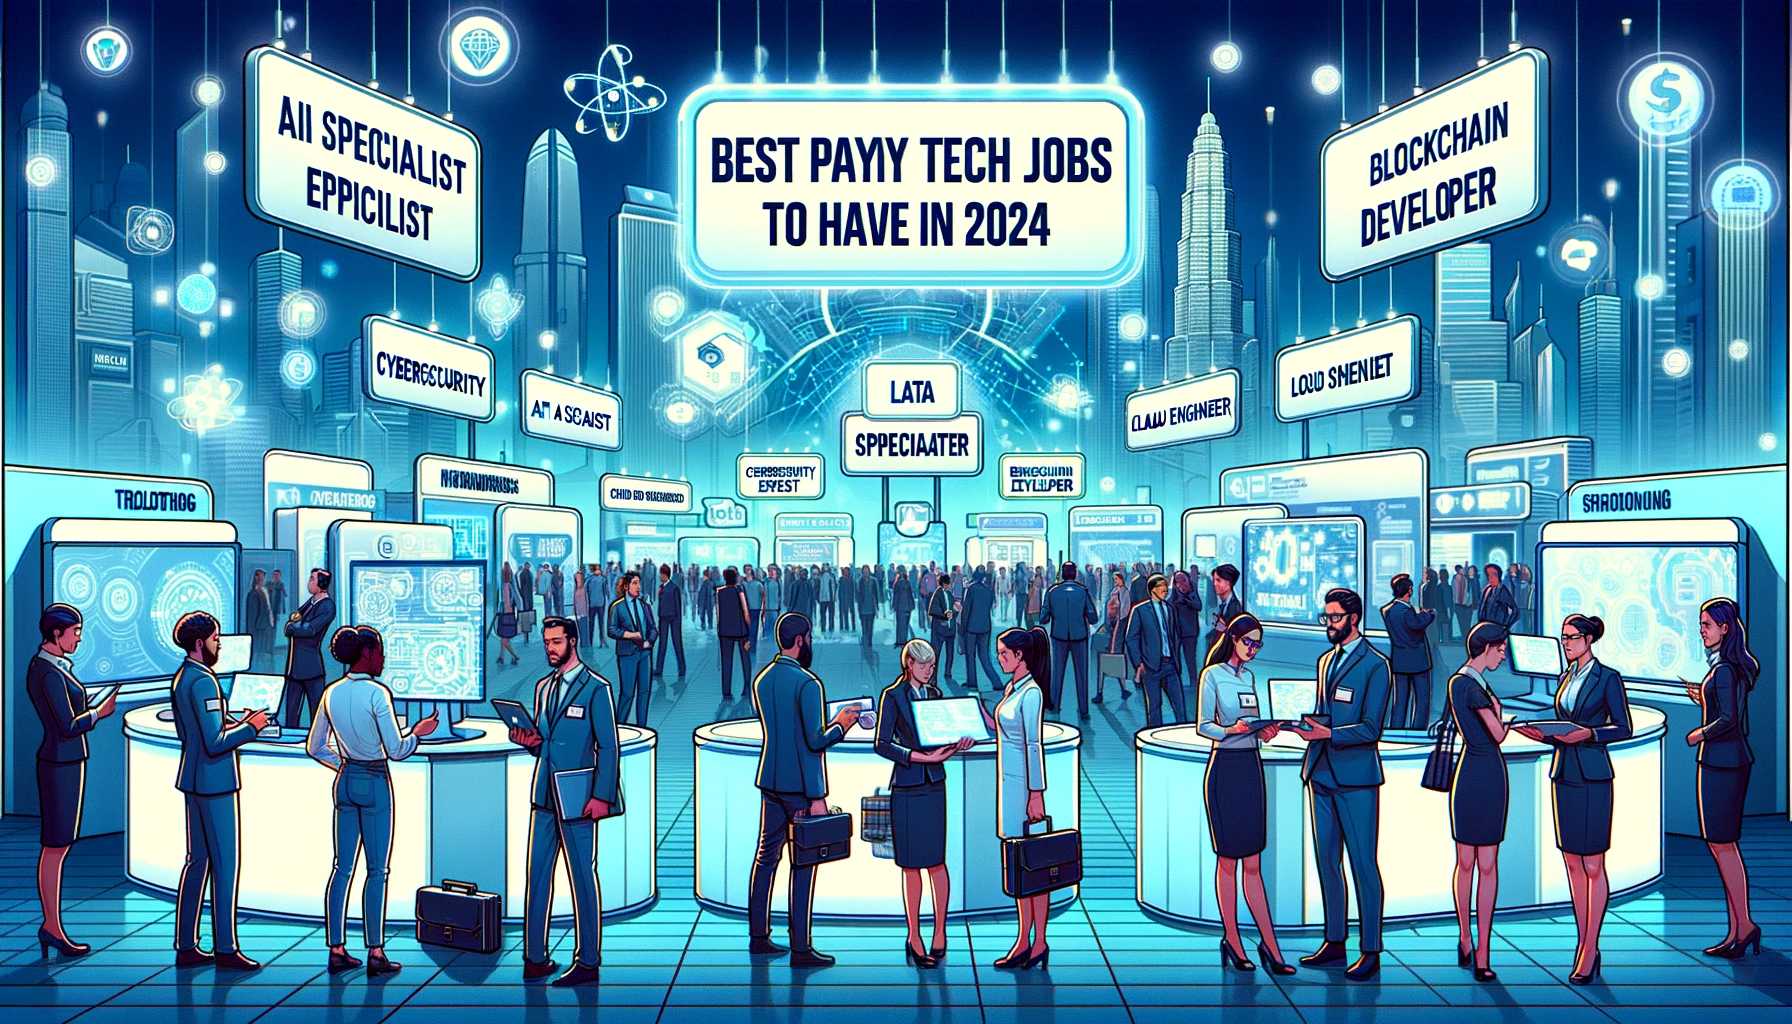 The Best Paying Tech Jobs to Have in 2024